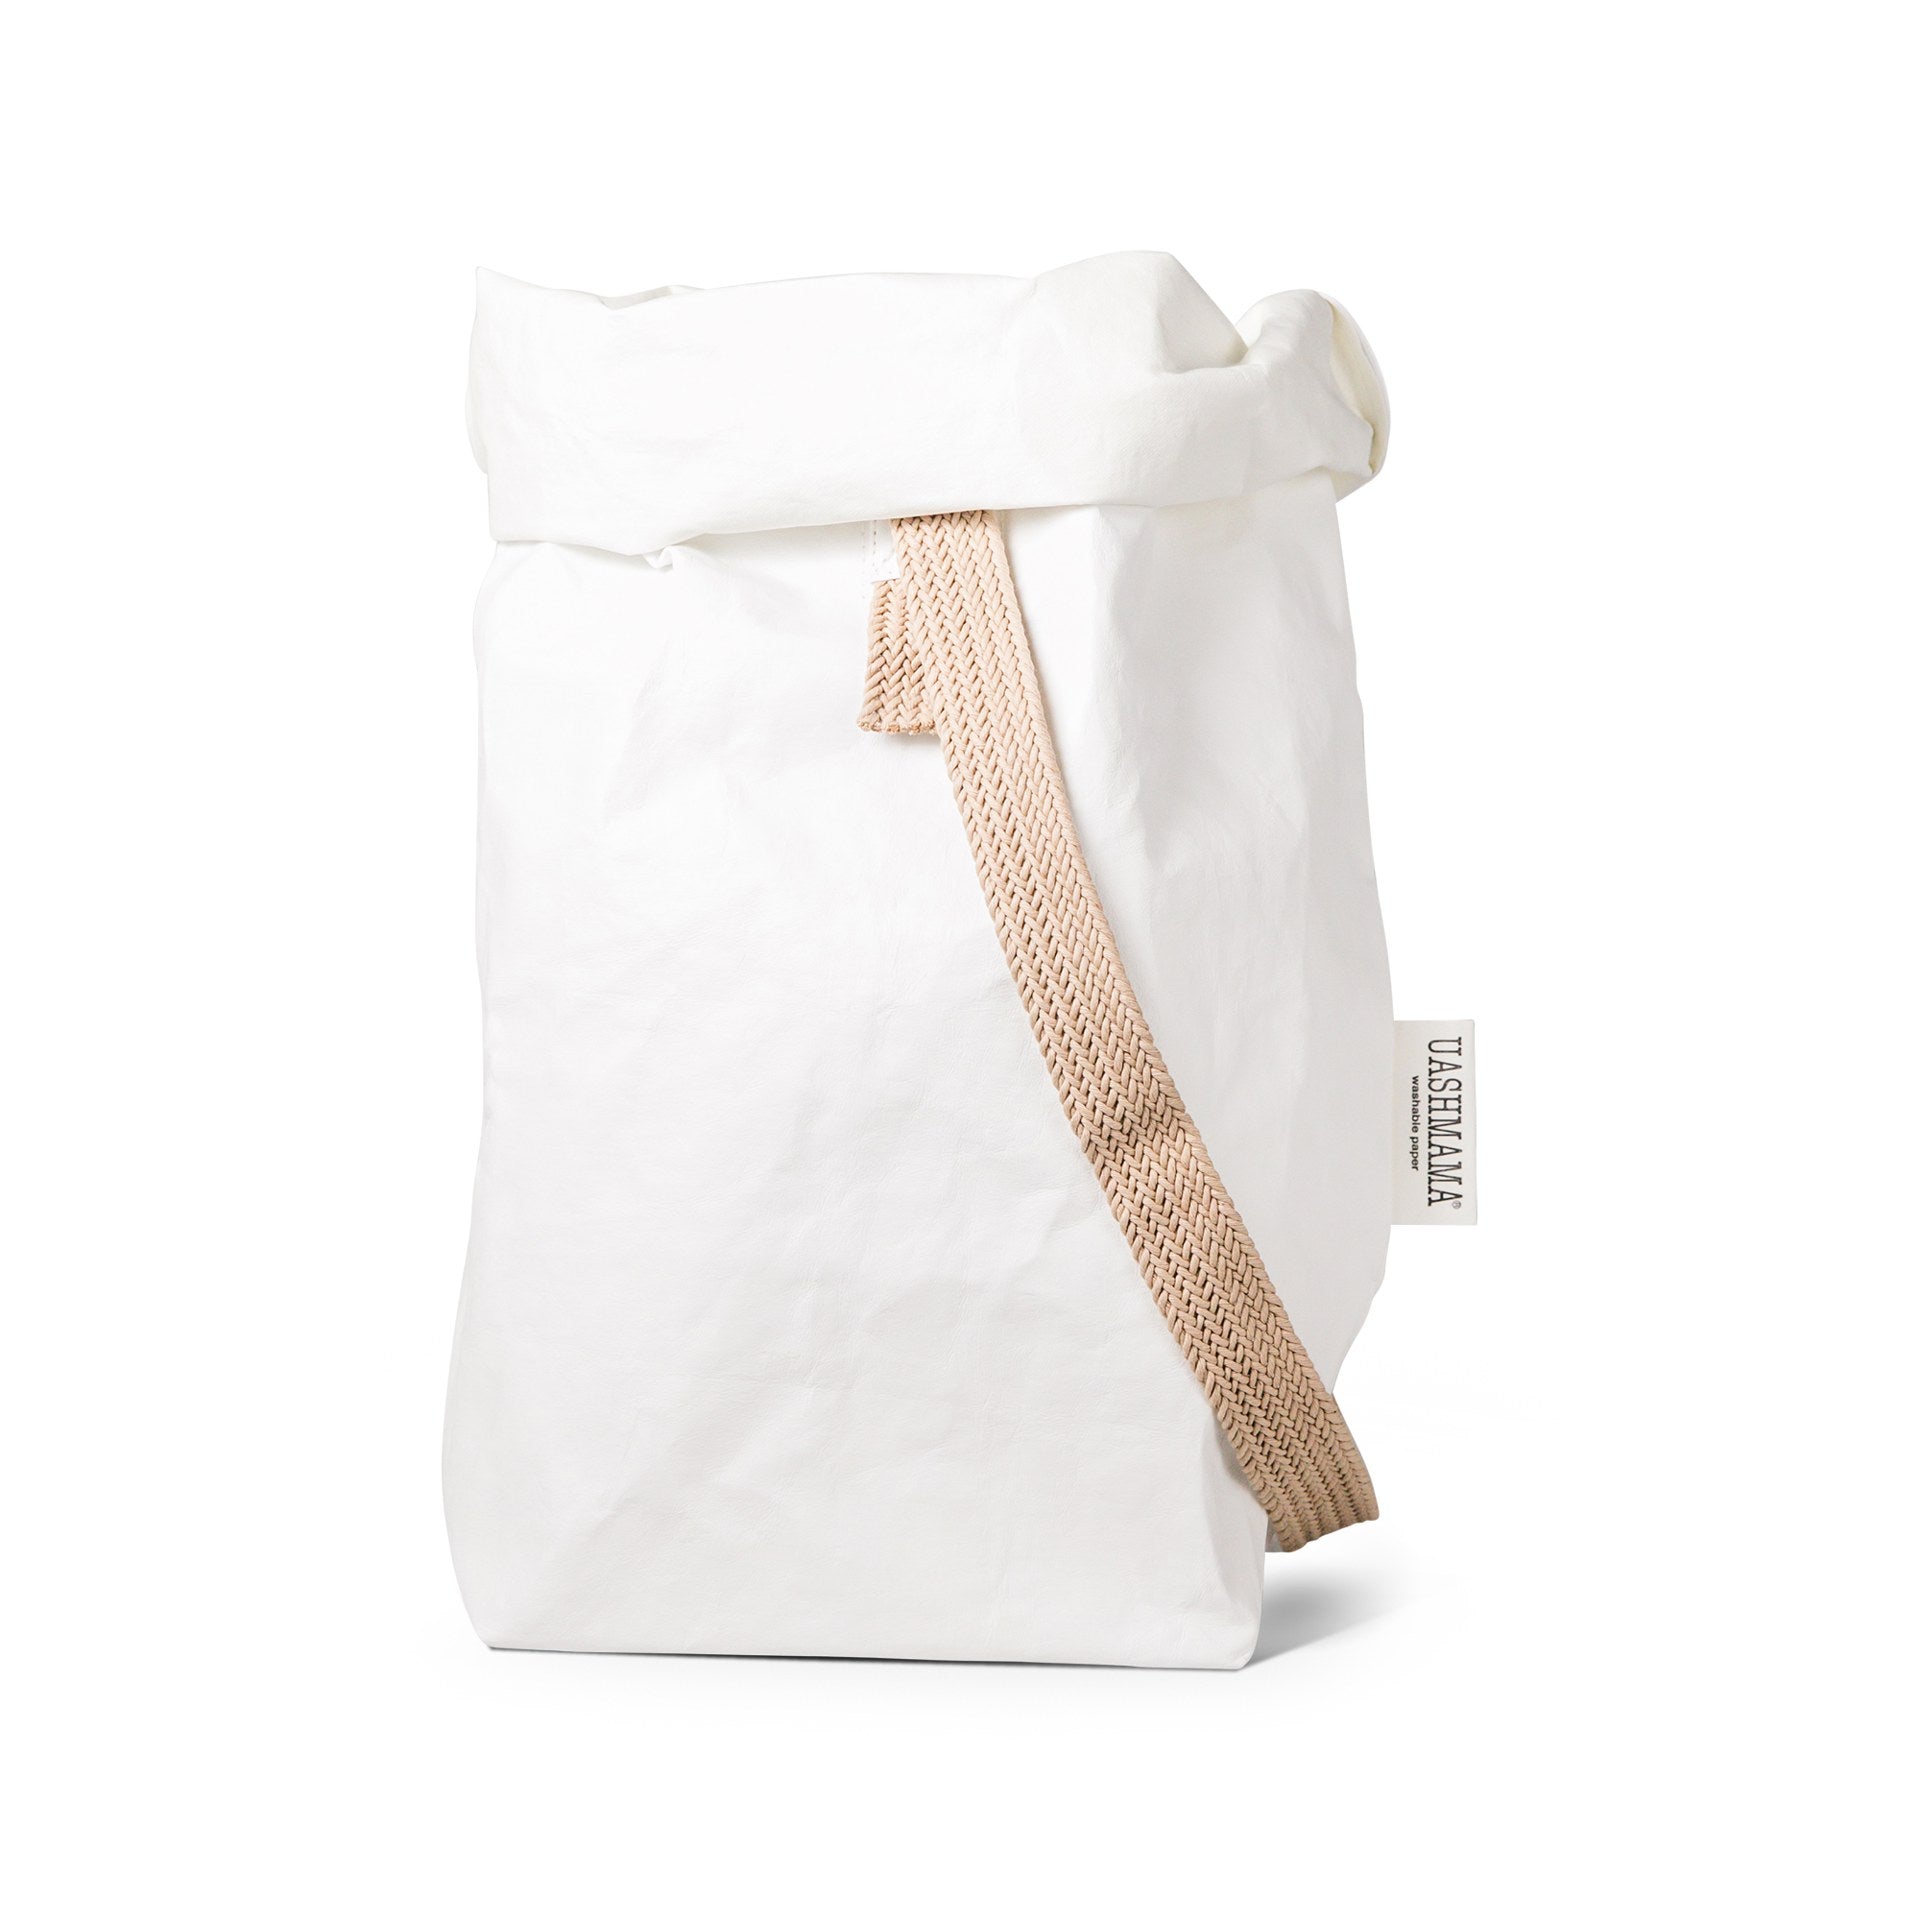 CARRY ONE TOTE BAG